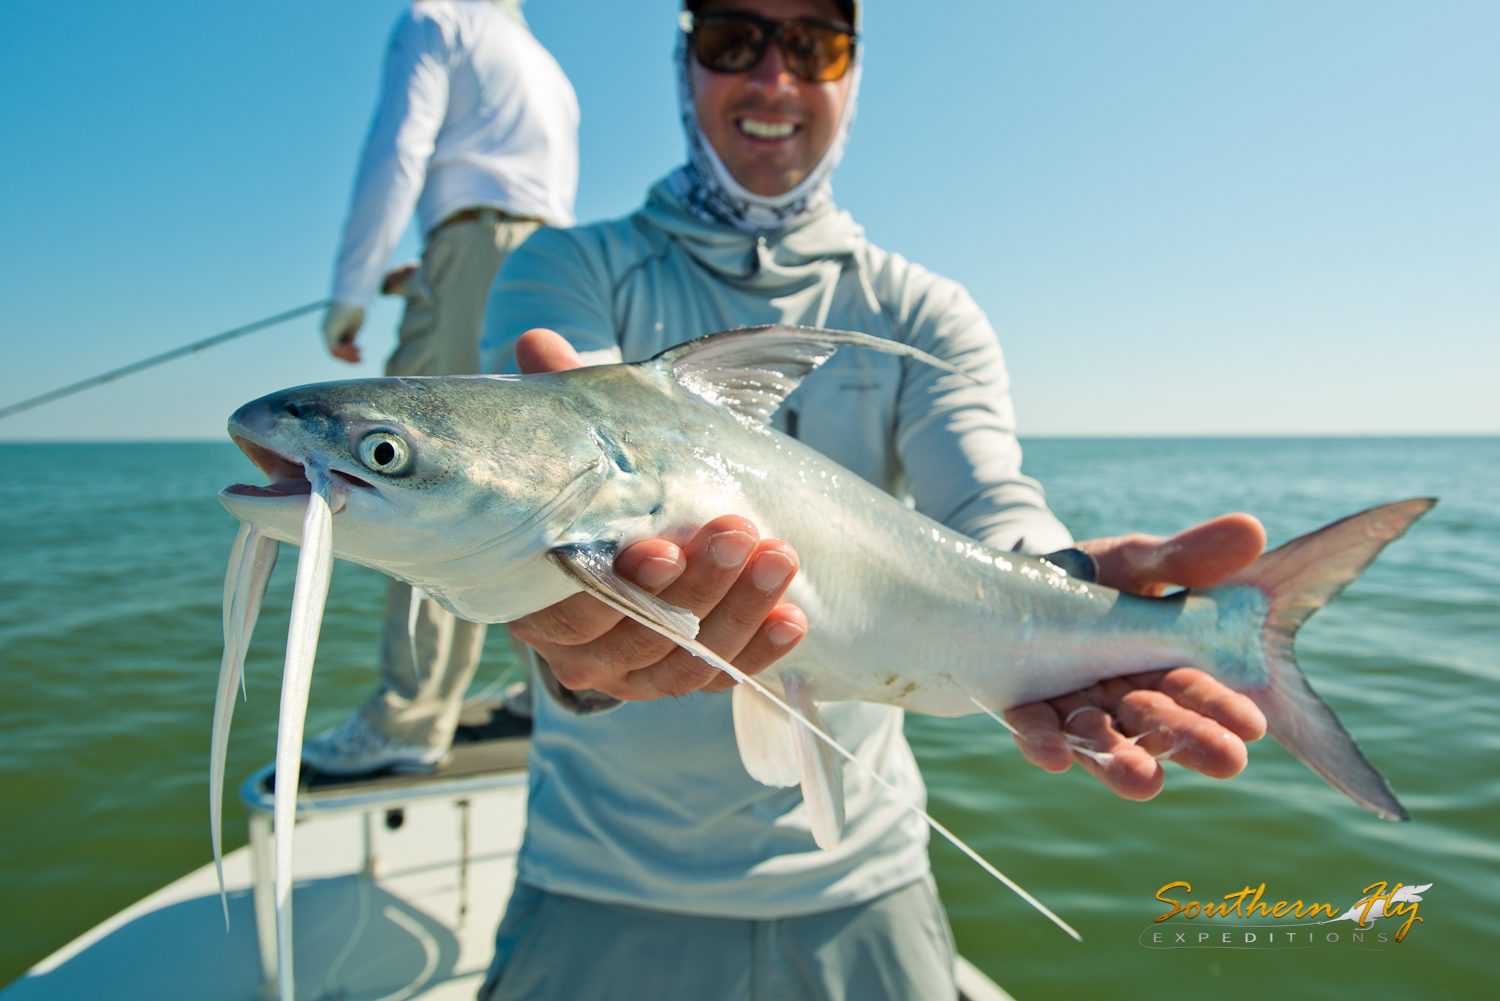 2016-11-13-15_SouthernFlyExpeditions_WesWillard_and_JacobKing-20.jpg